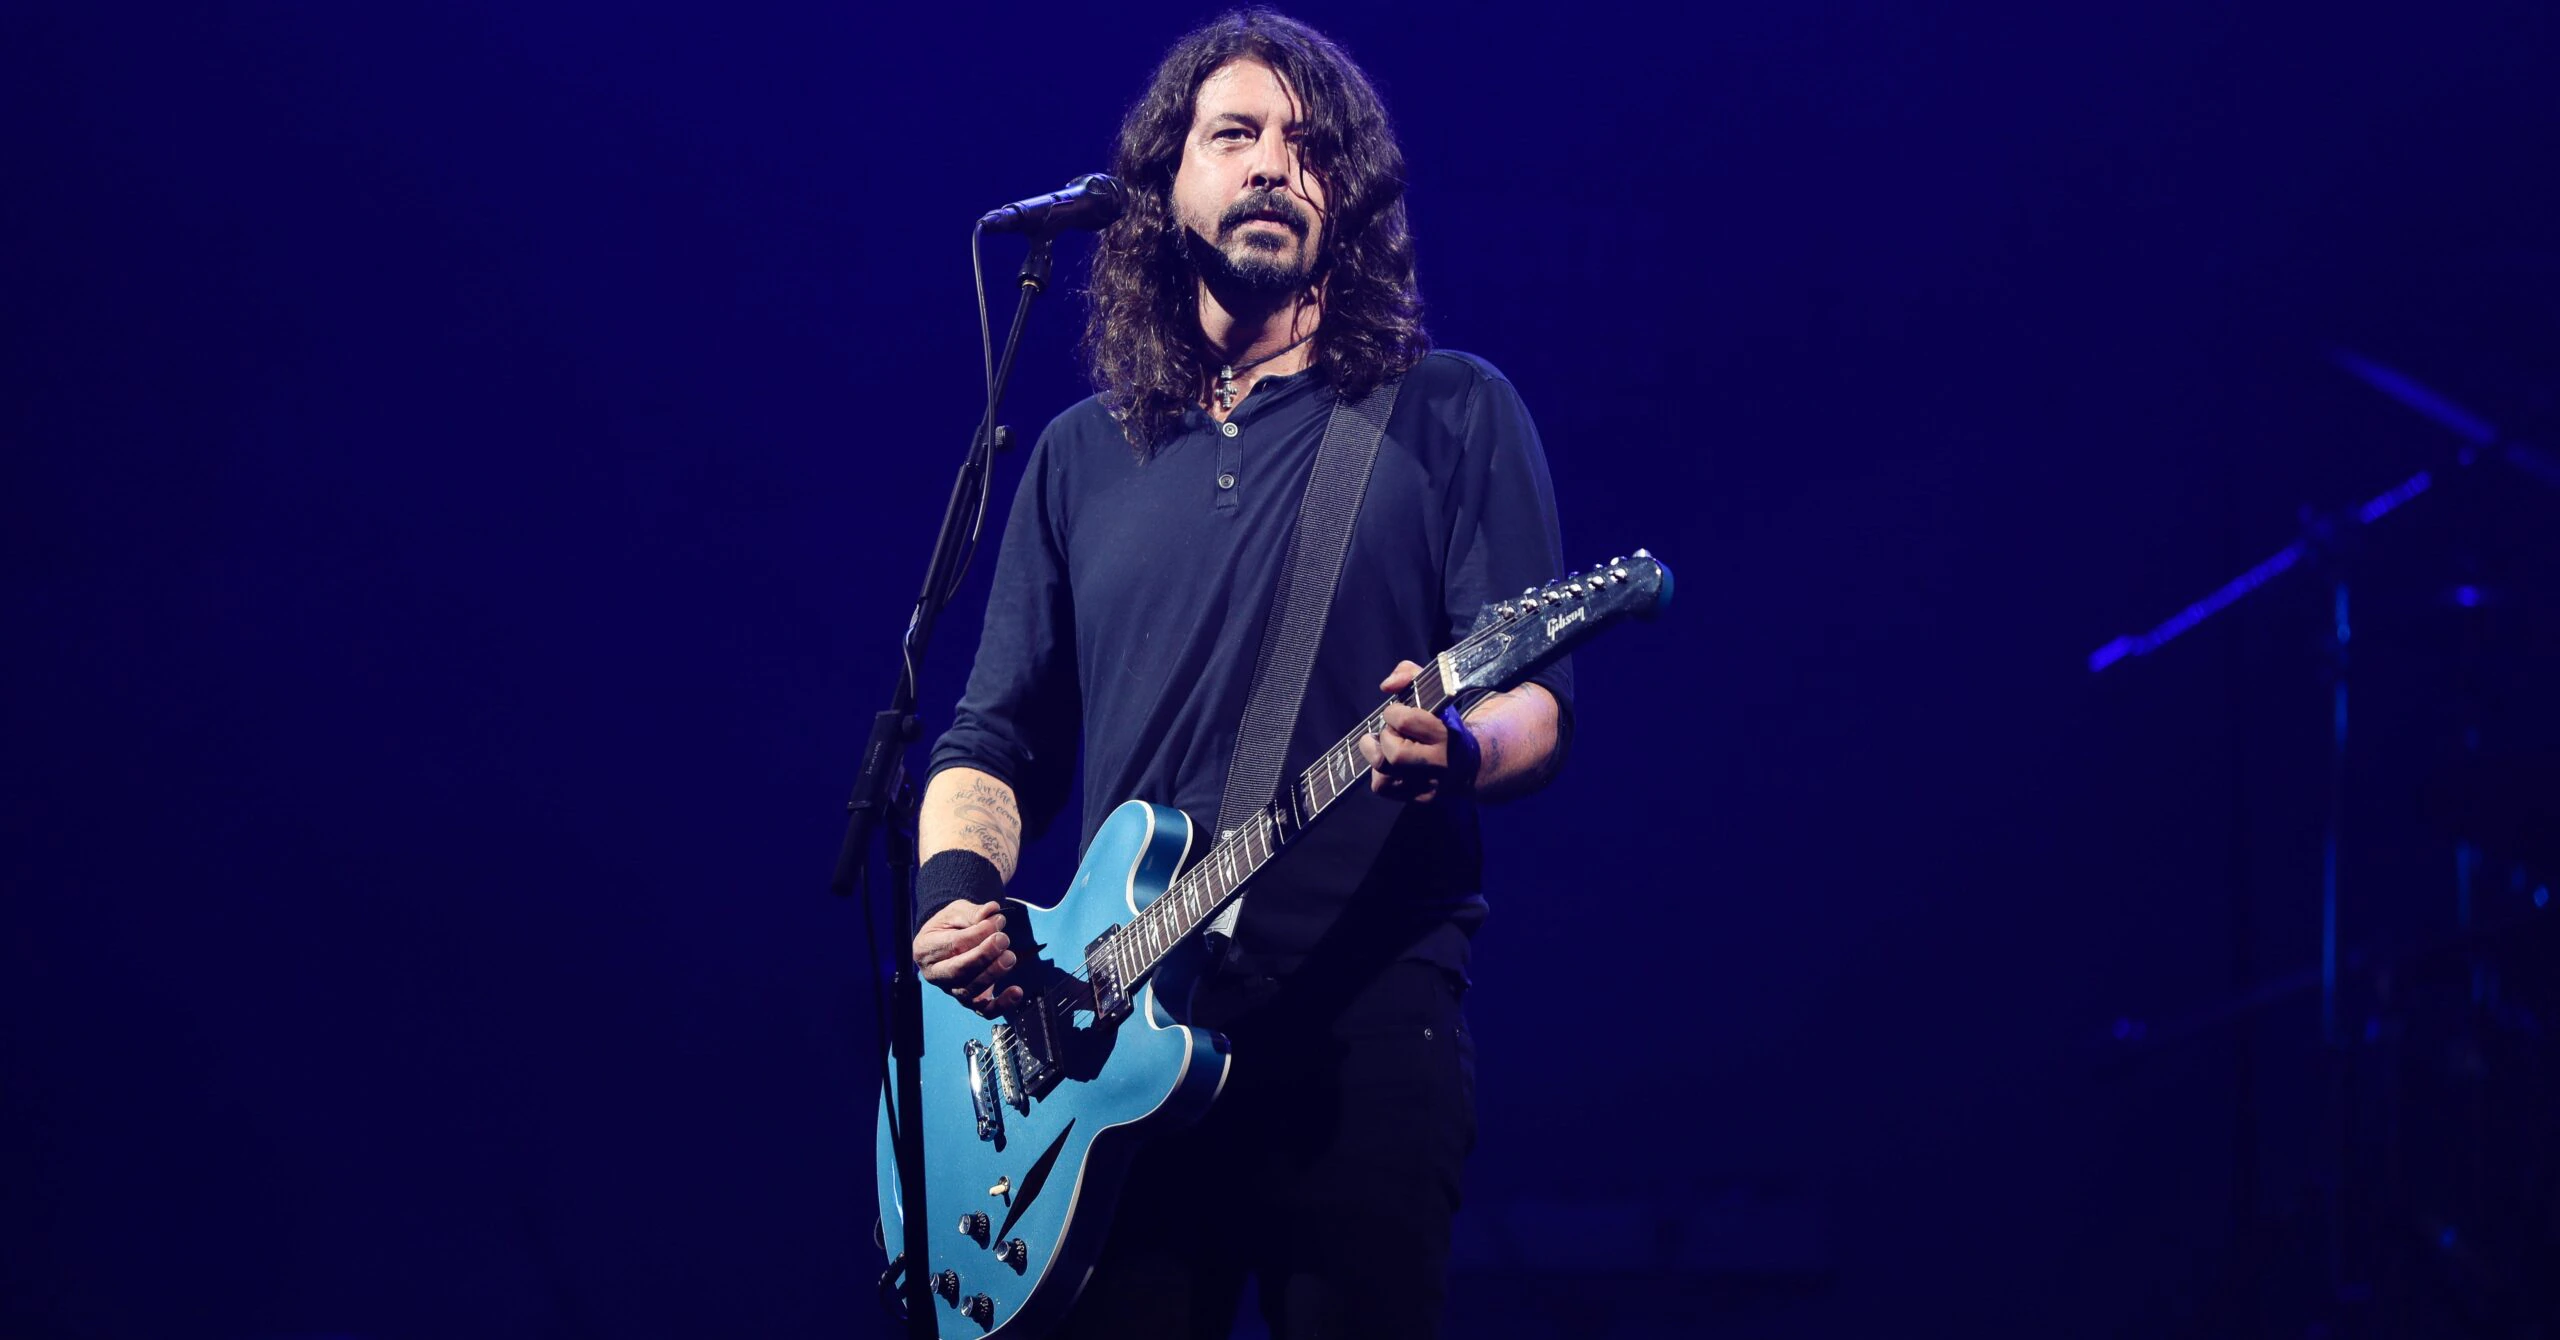 Video of Dave Grohl Stopping Foo Fighters Concert to Help Fan Goes Viral After Deadly Astroworld Tragedy